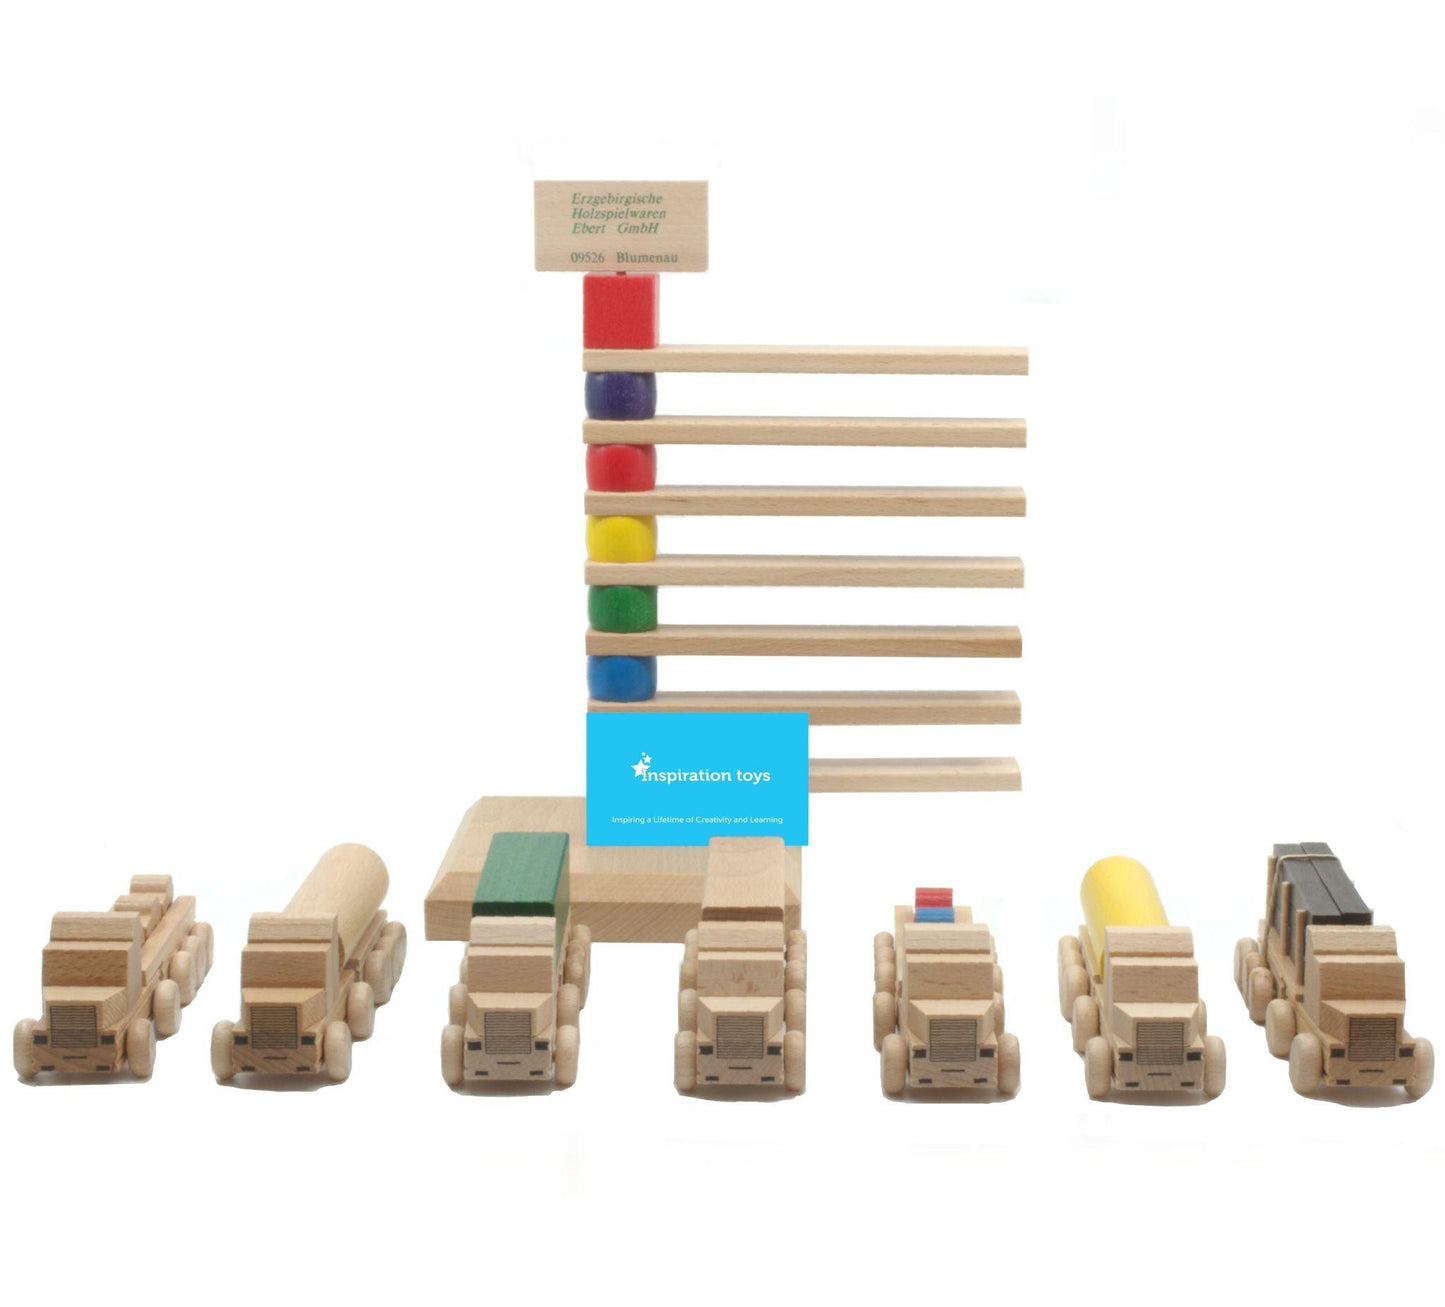 Wooden toy truck collection off stand